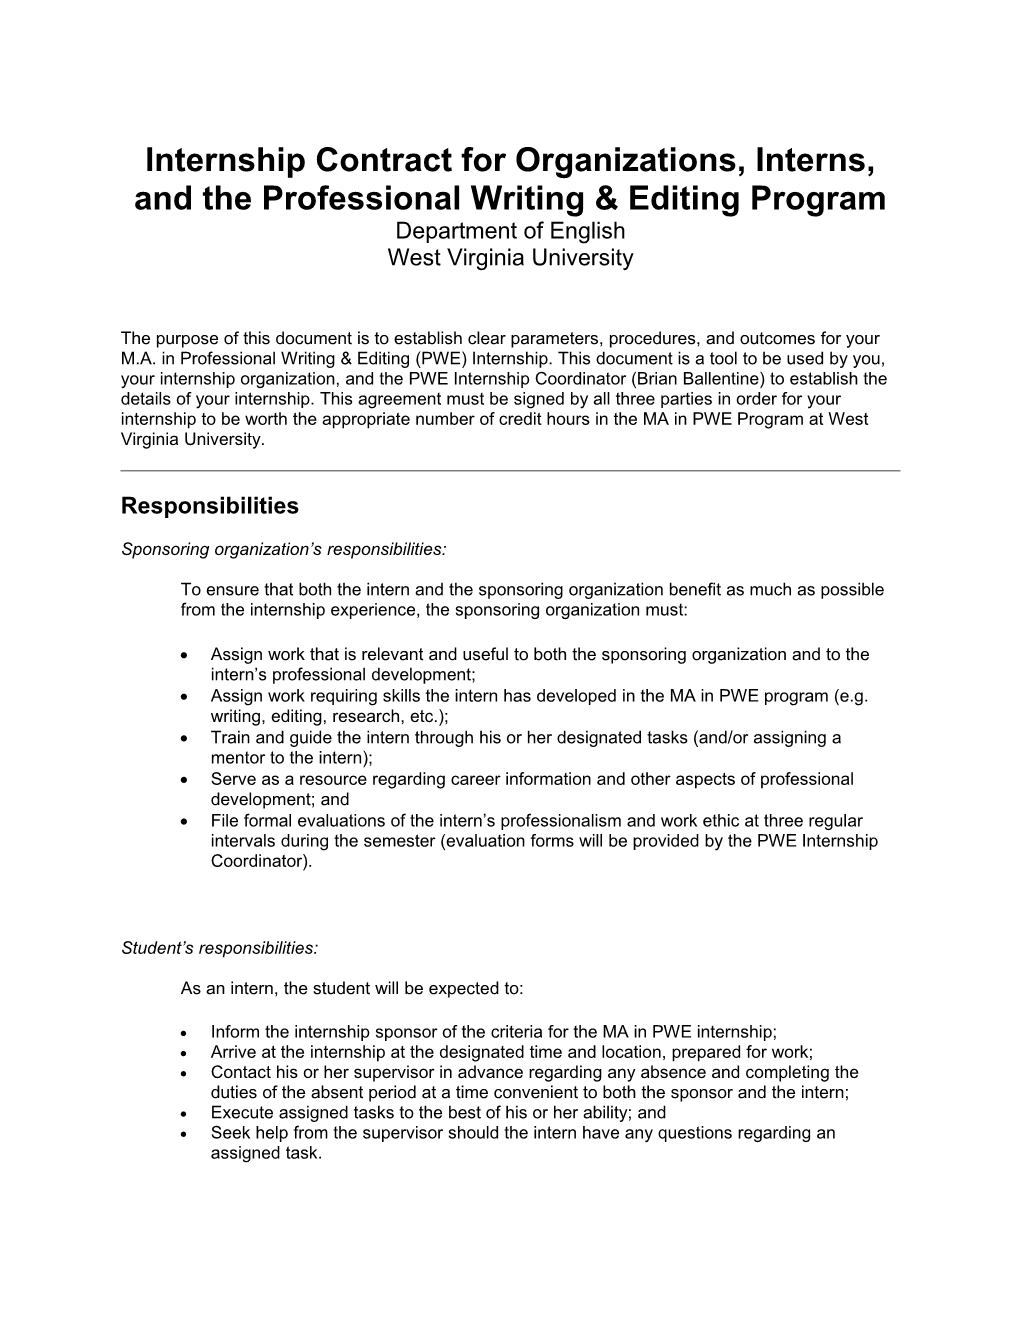 Internship Contract for Organizations, Interns, and the Profess